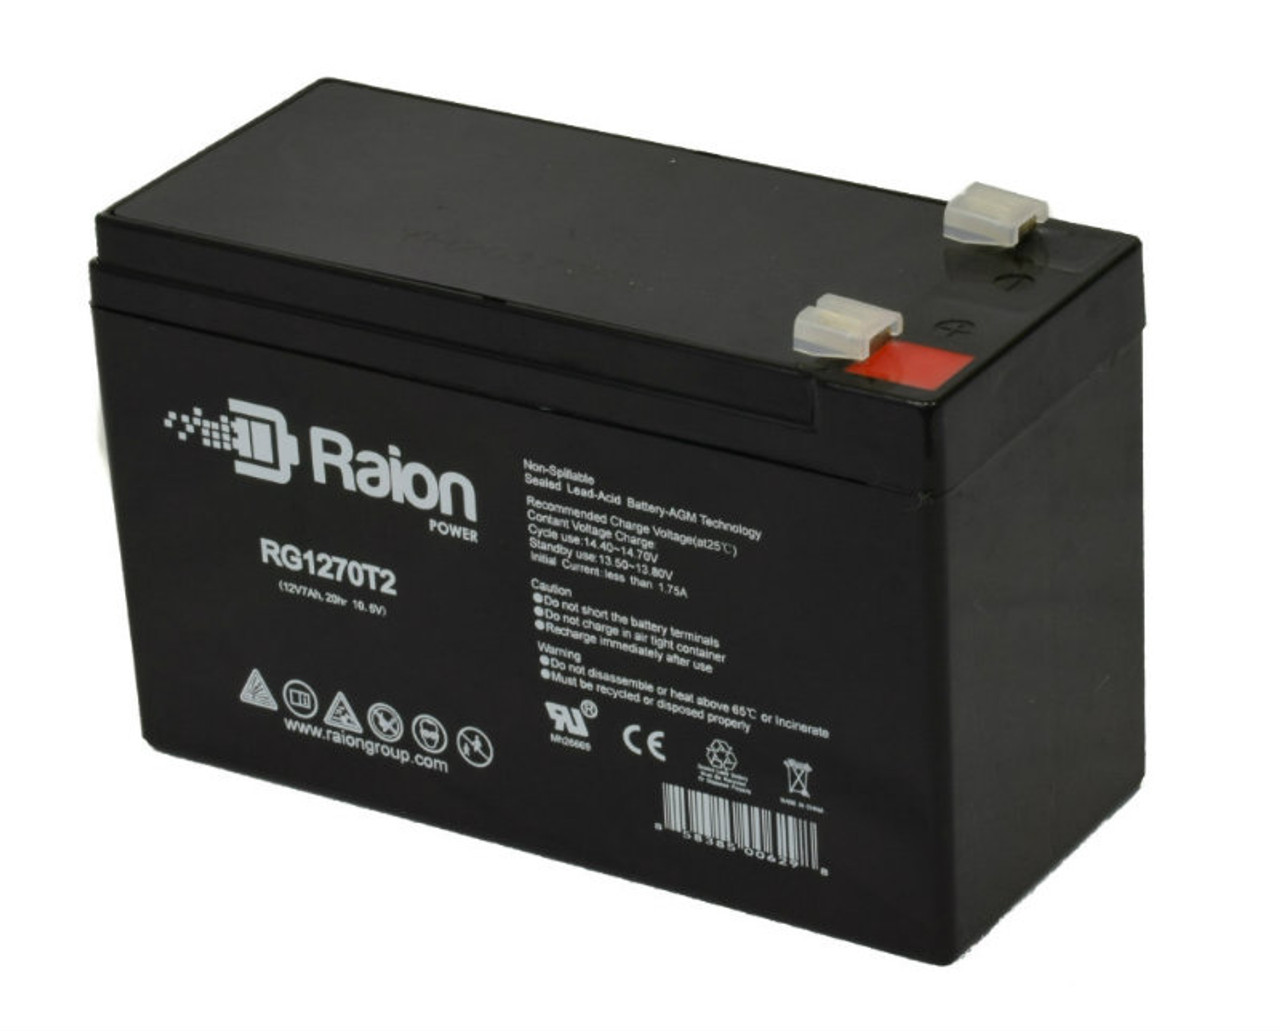 Raion Power Replacement RG1270T1 Battery for Bruno Elite Straight Stairlift SRE 2010